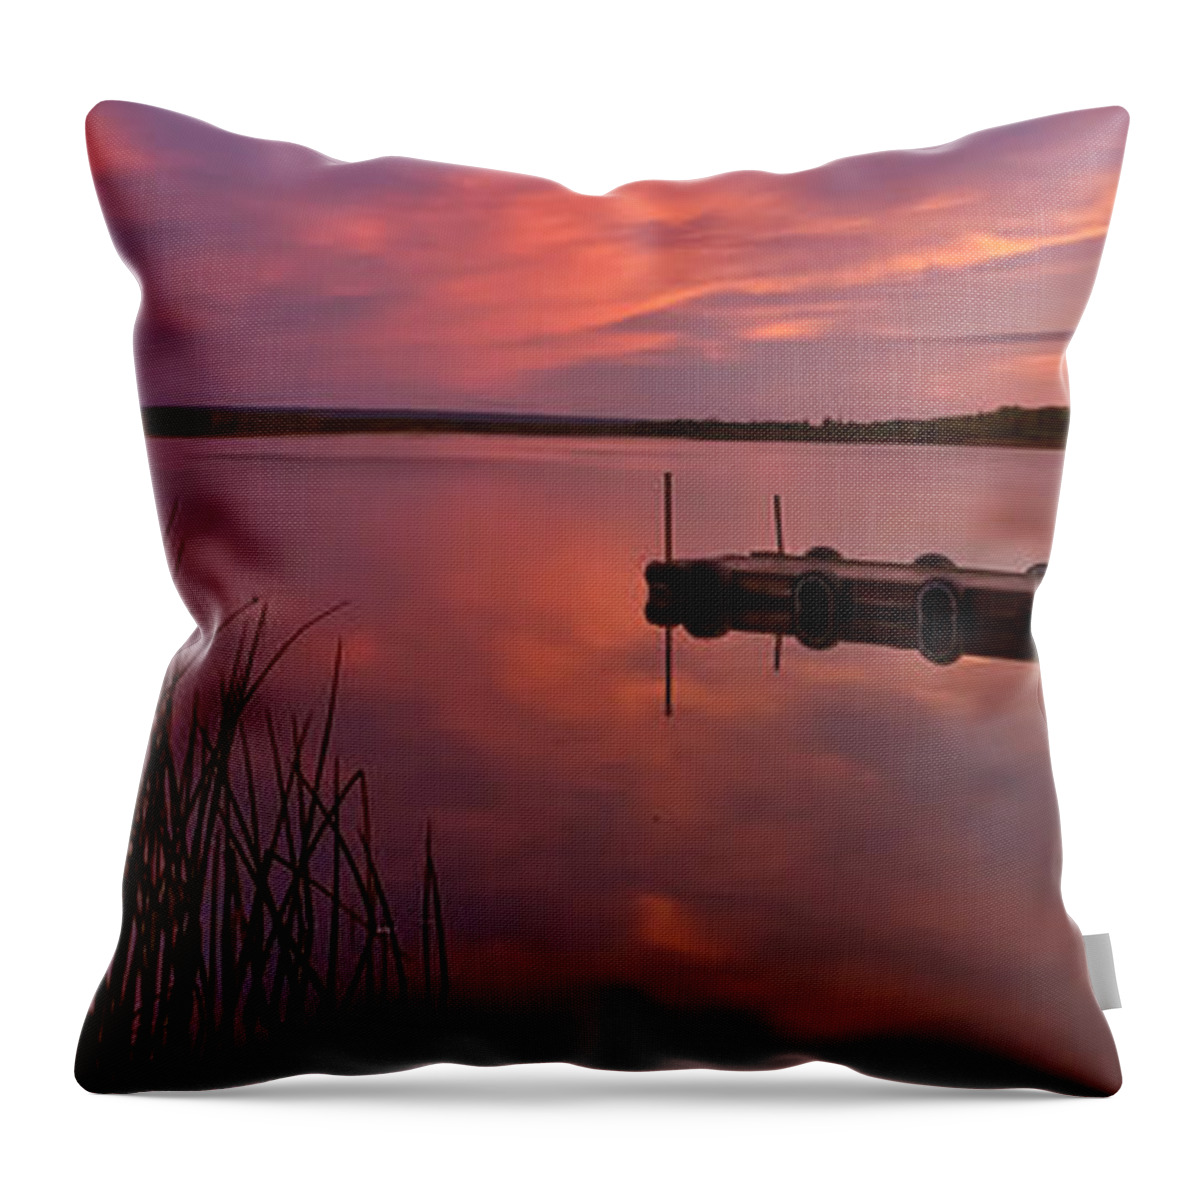  Throw Pillow featuring the digital art Panoramic Sunset Northern Lake by Mark Duffy